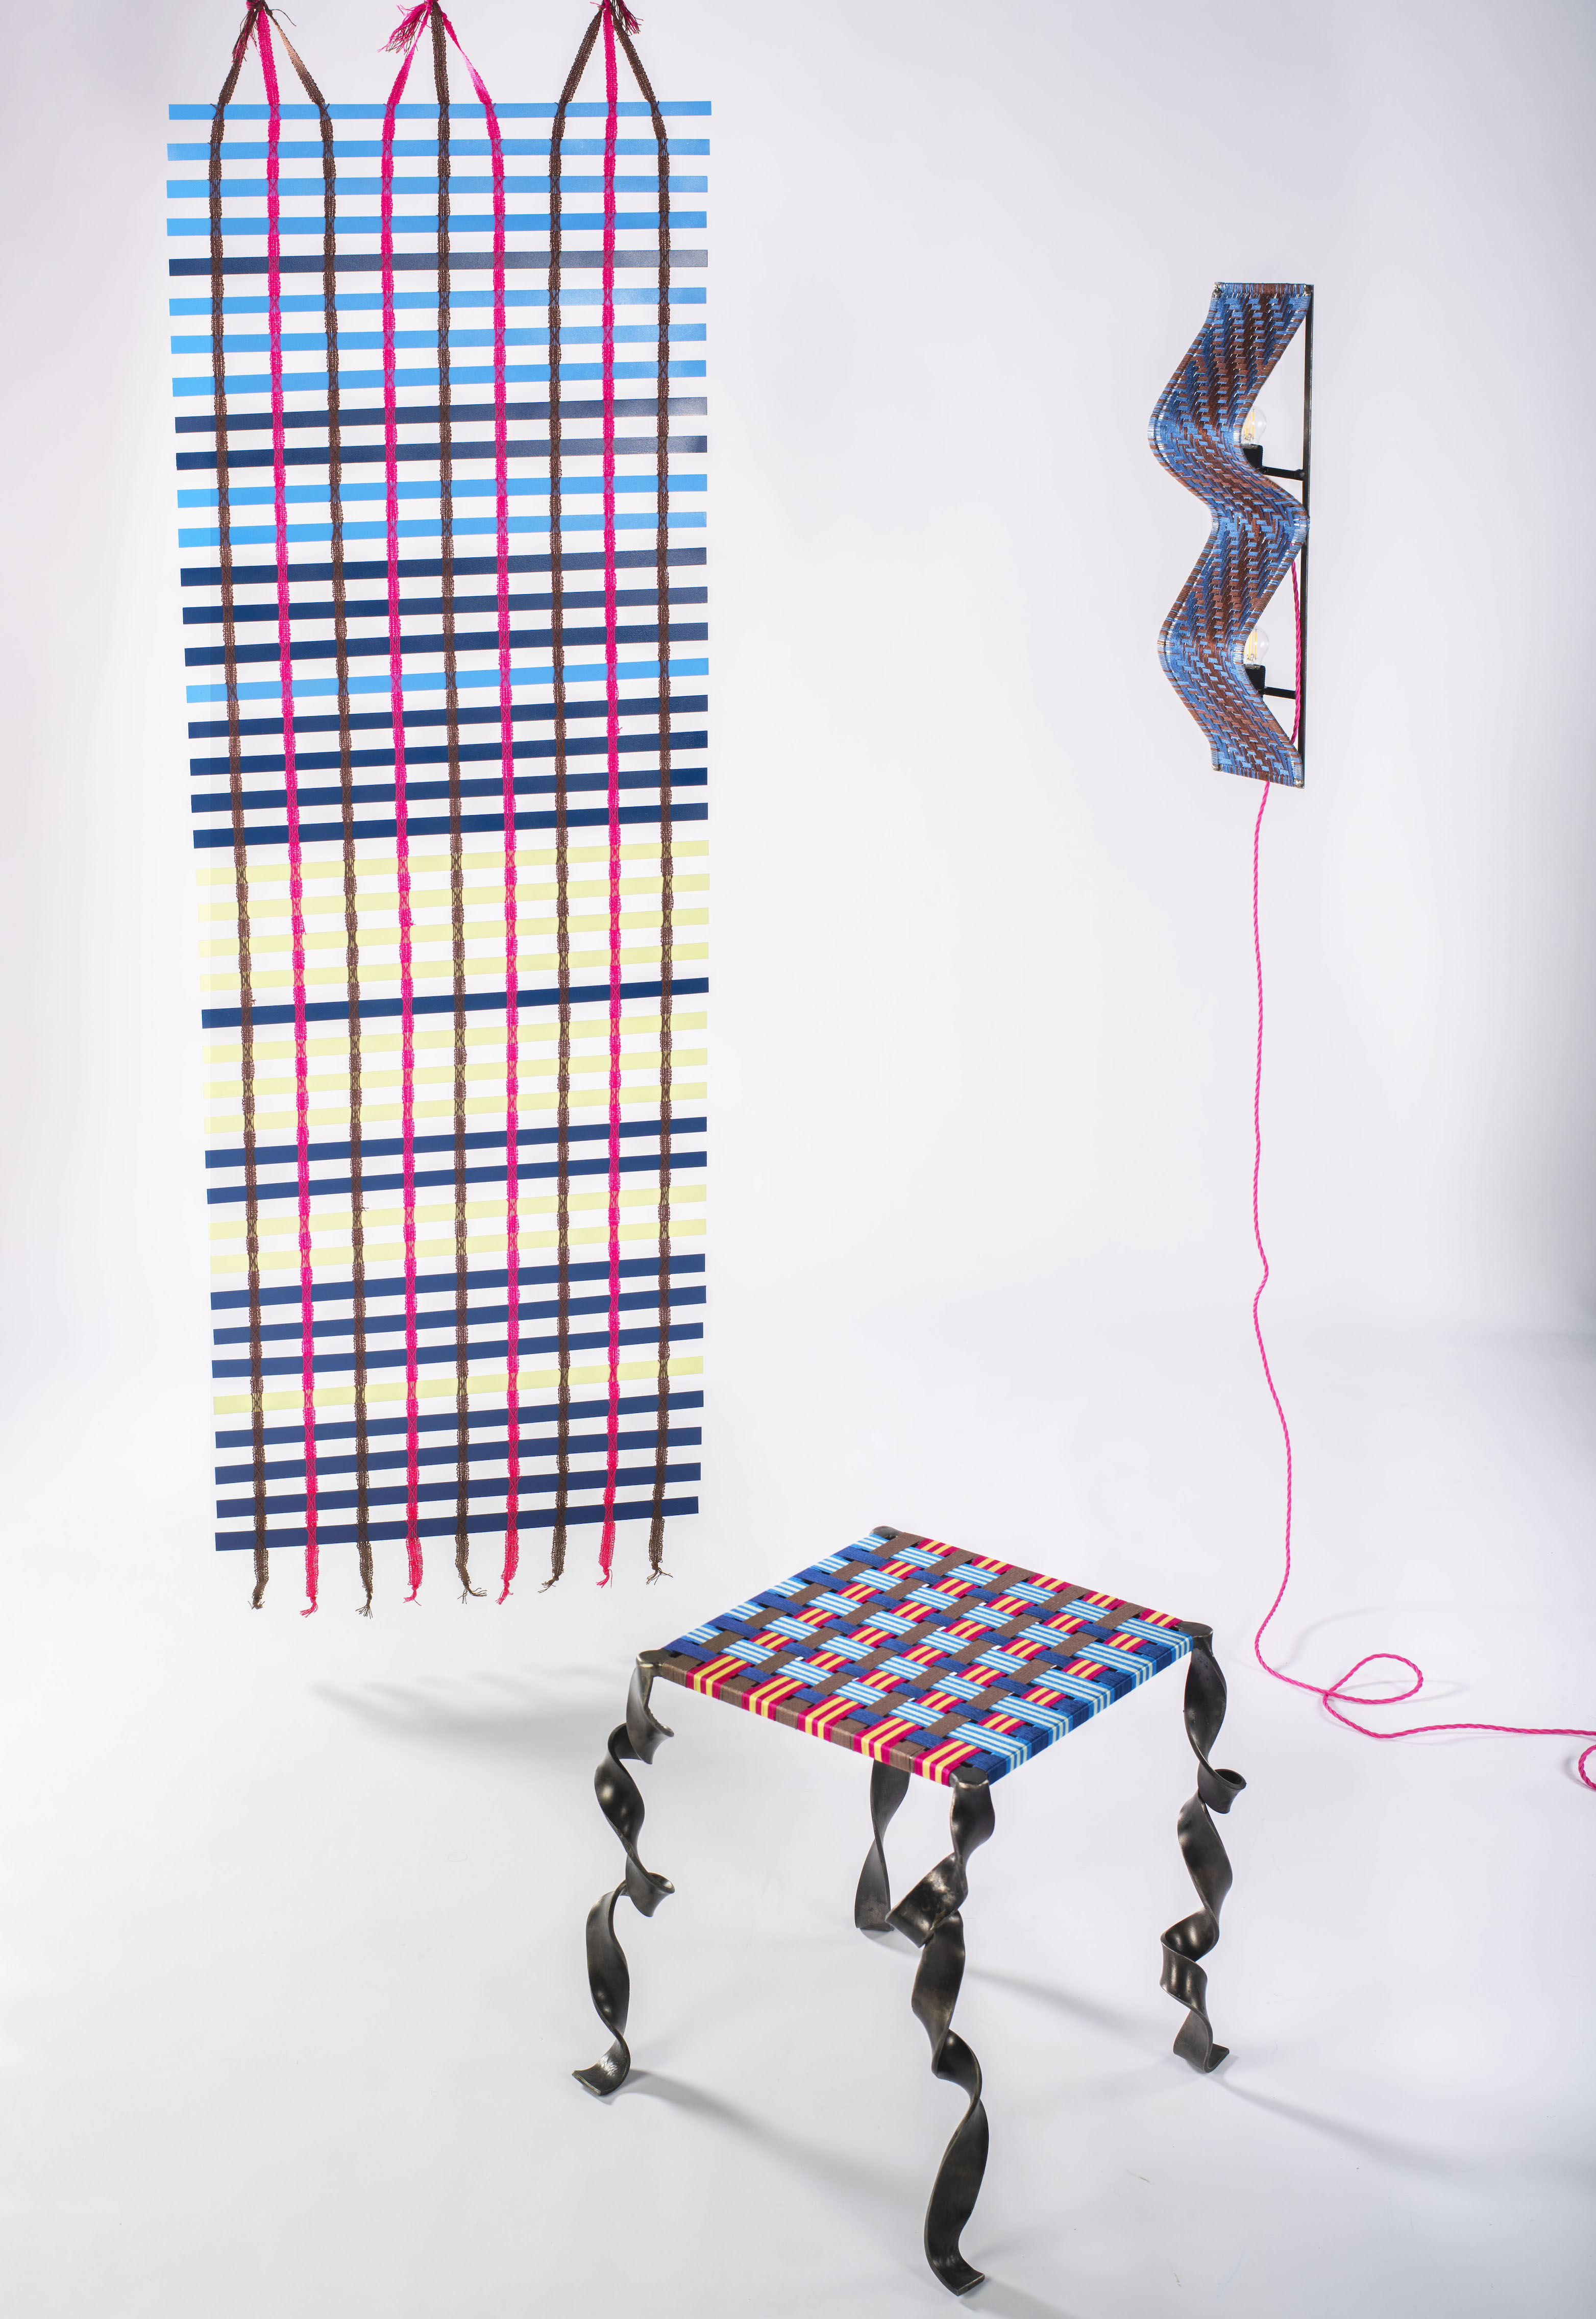 Mair Cook, MA Textile Design, final collection, featuring hanging room screen, stool and light piece in clashing colours.